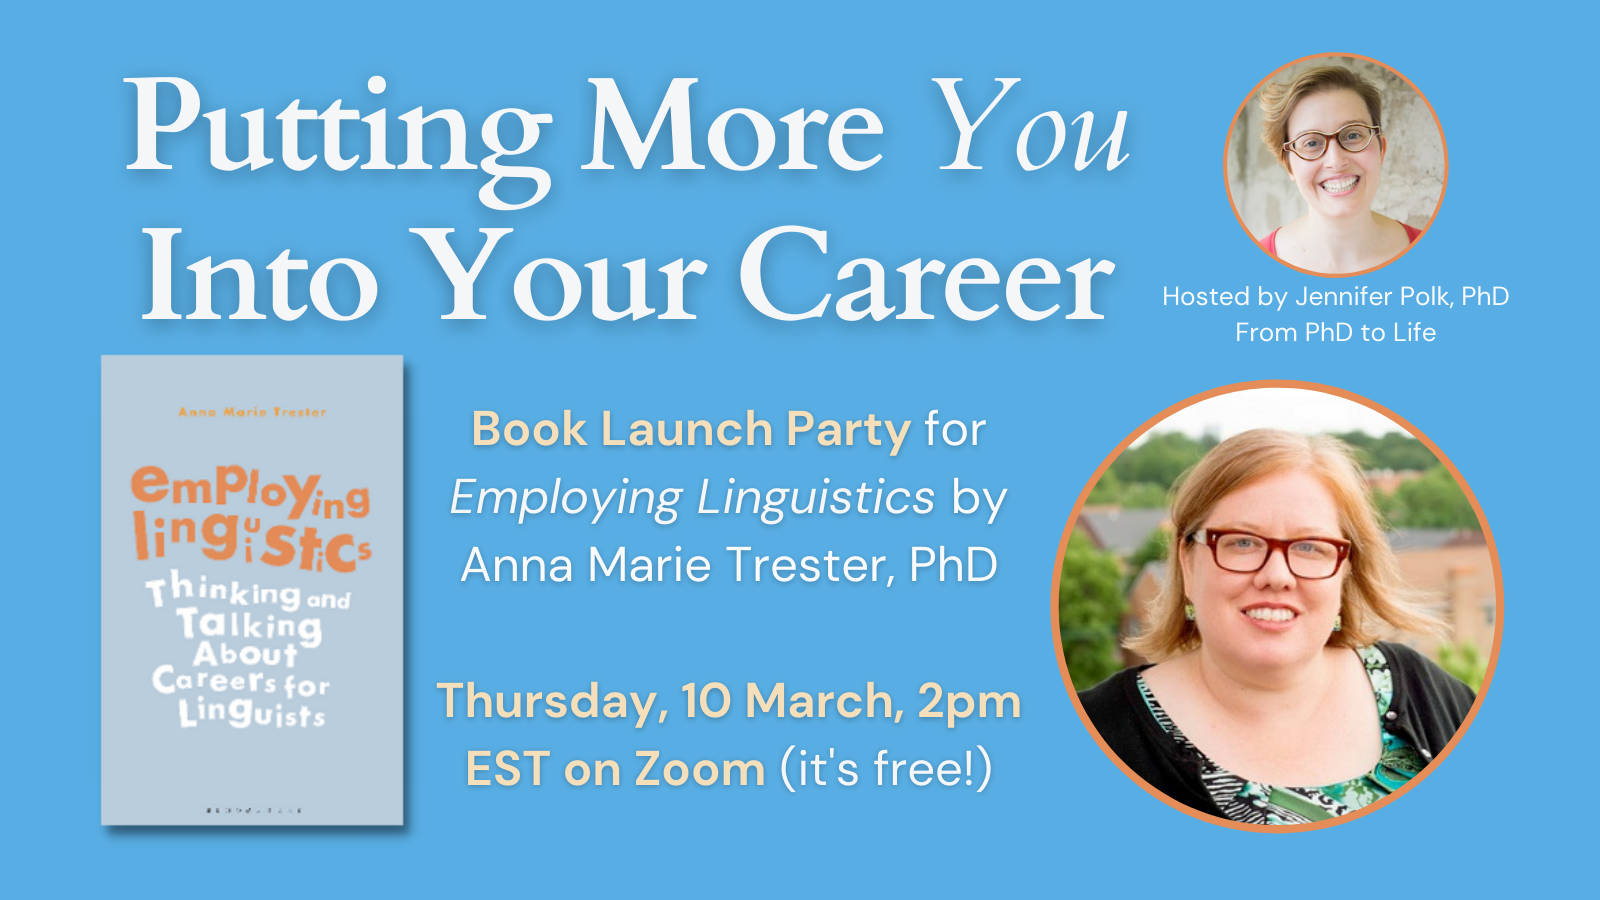 You’re invited to a book launch party!